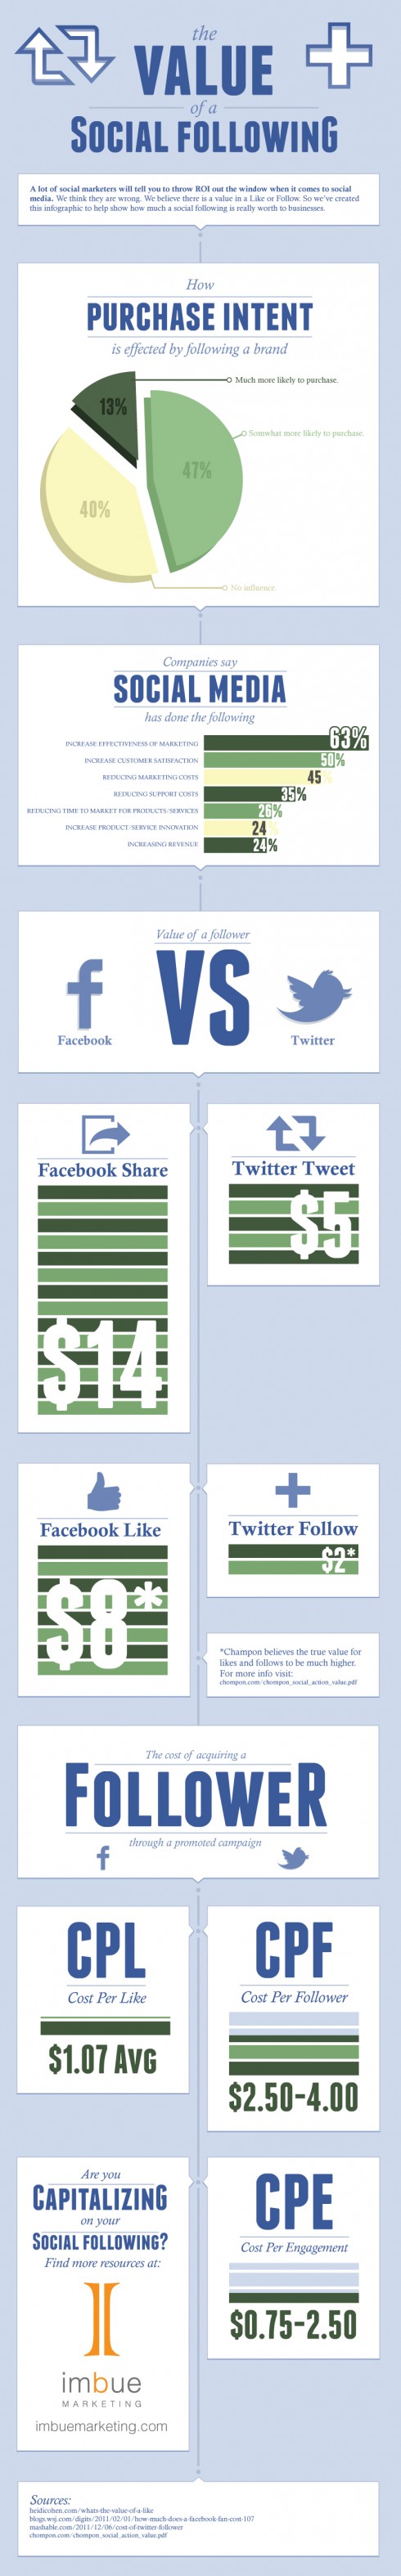 The Value of a Social Following [INFOGRAPHIC]